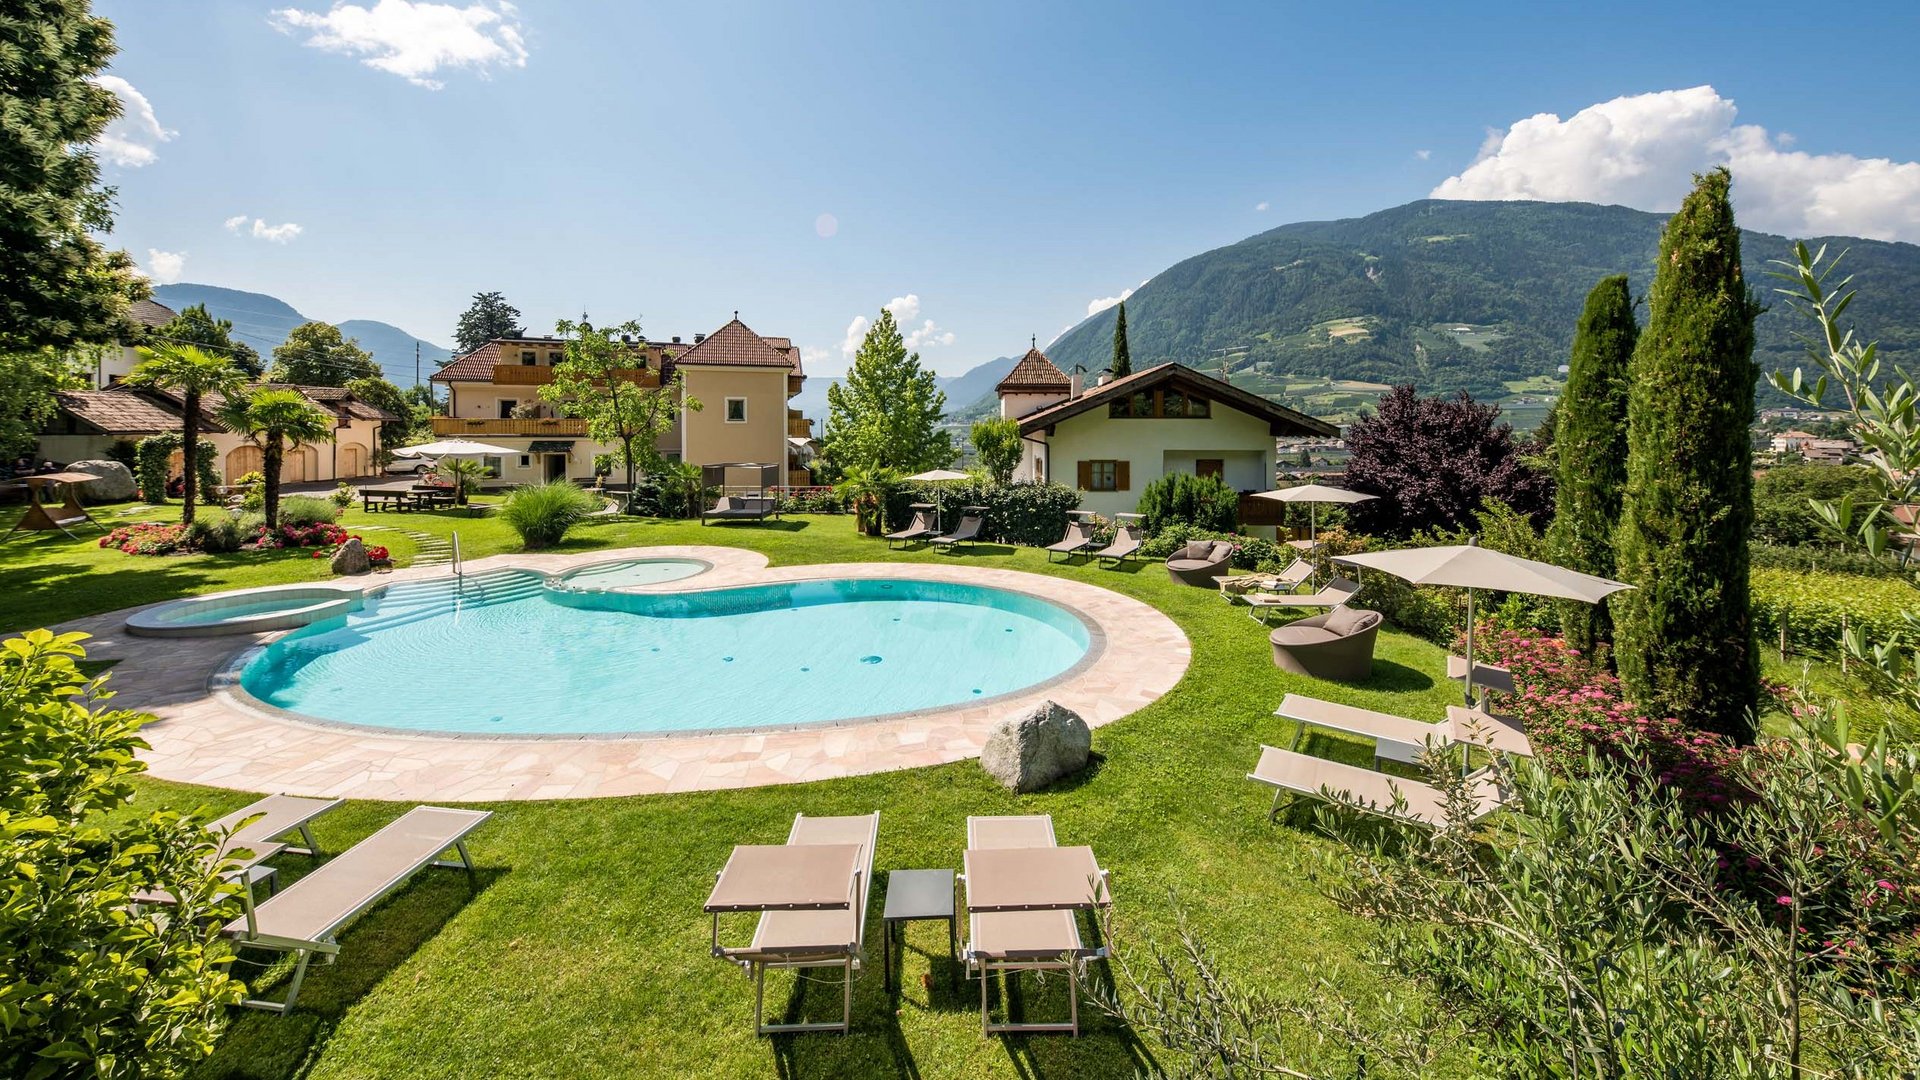 Your hotel in Meran with a pool